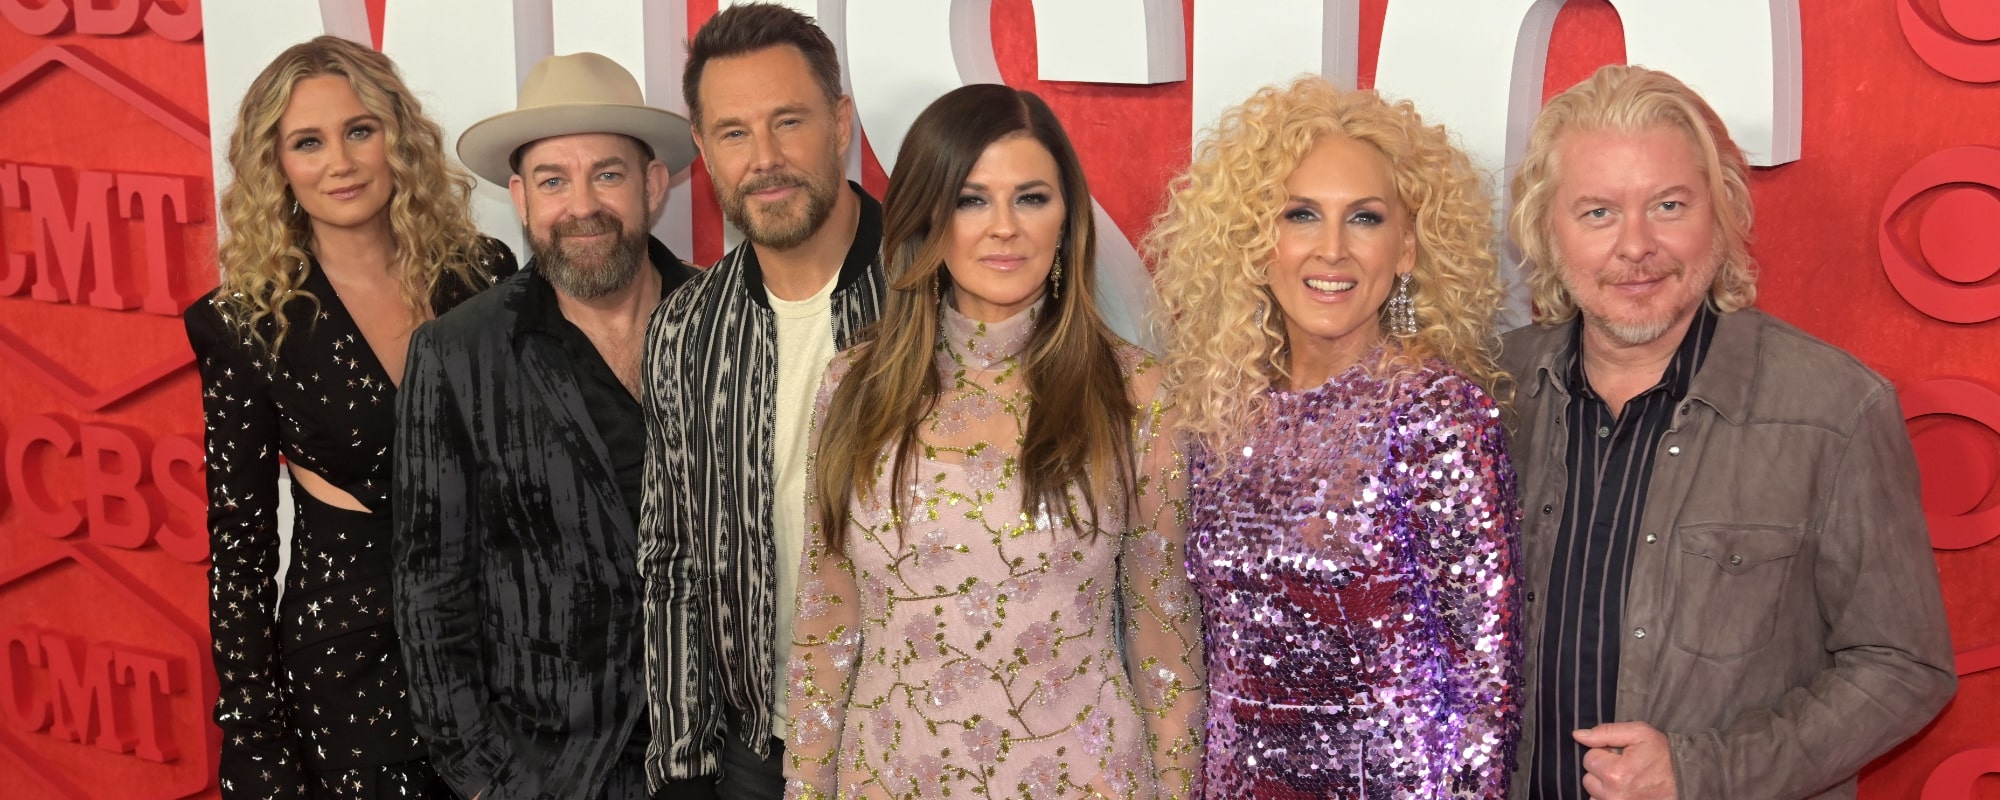 Sugarland and Little Big Town Discuss “Take Me Home” and Their Upcoming Co-Headlining Tour